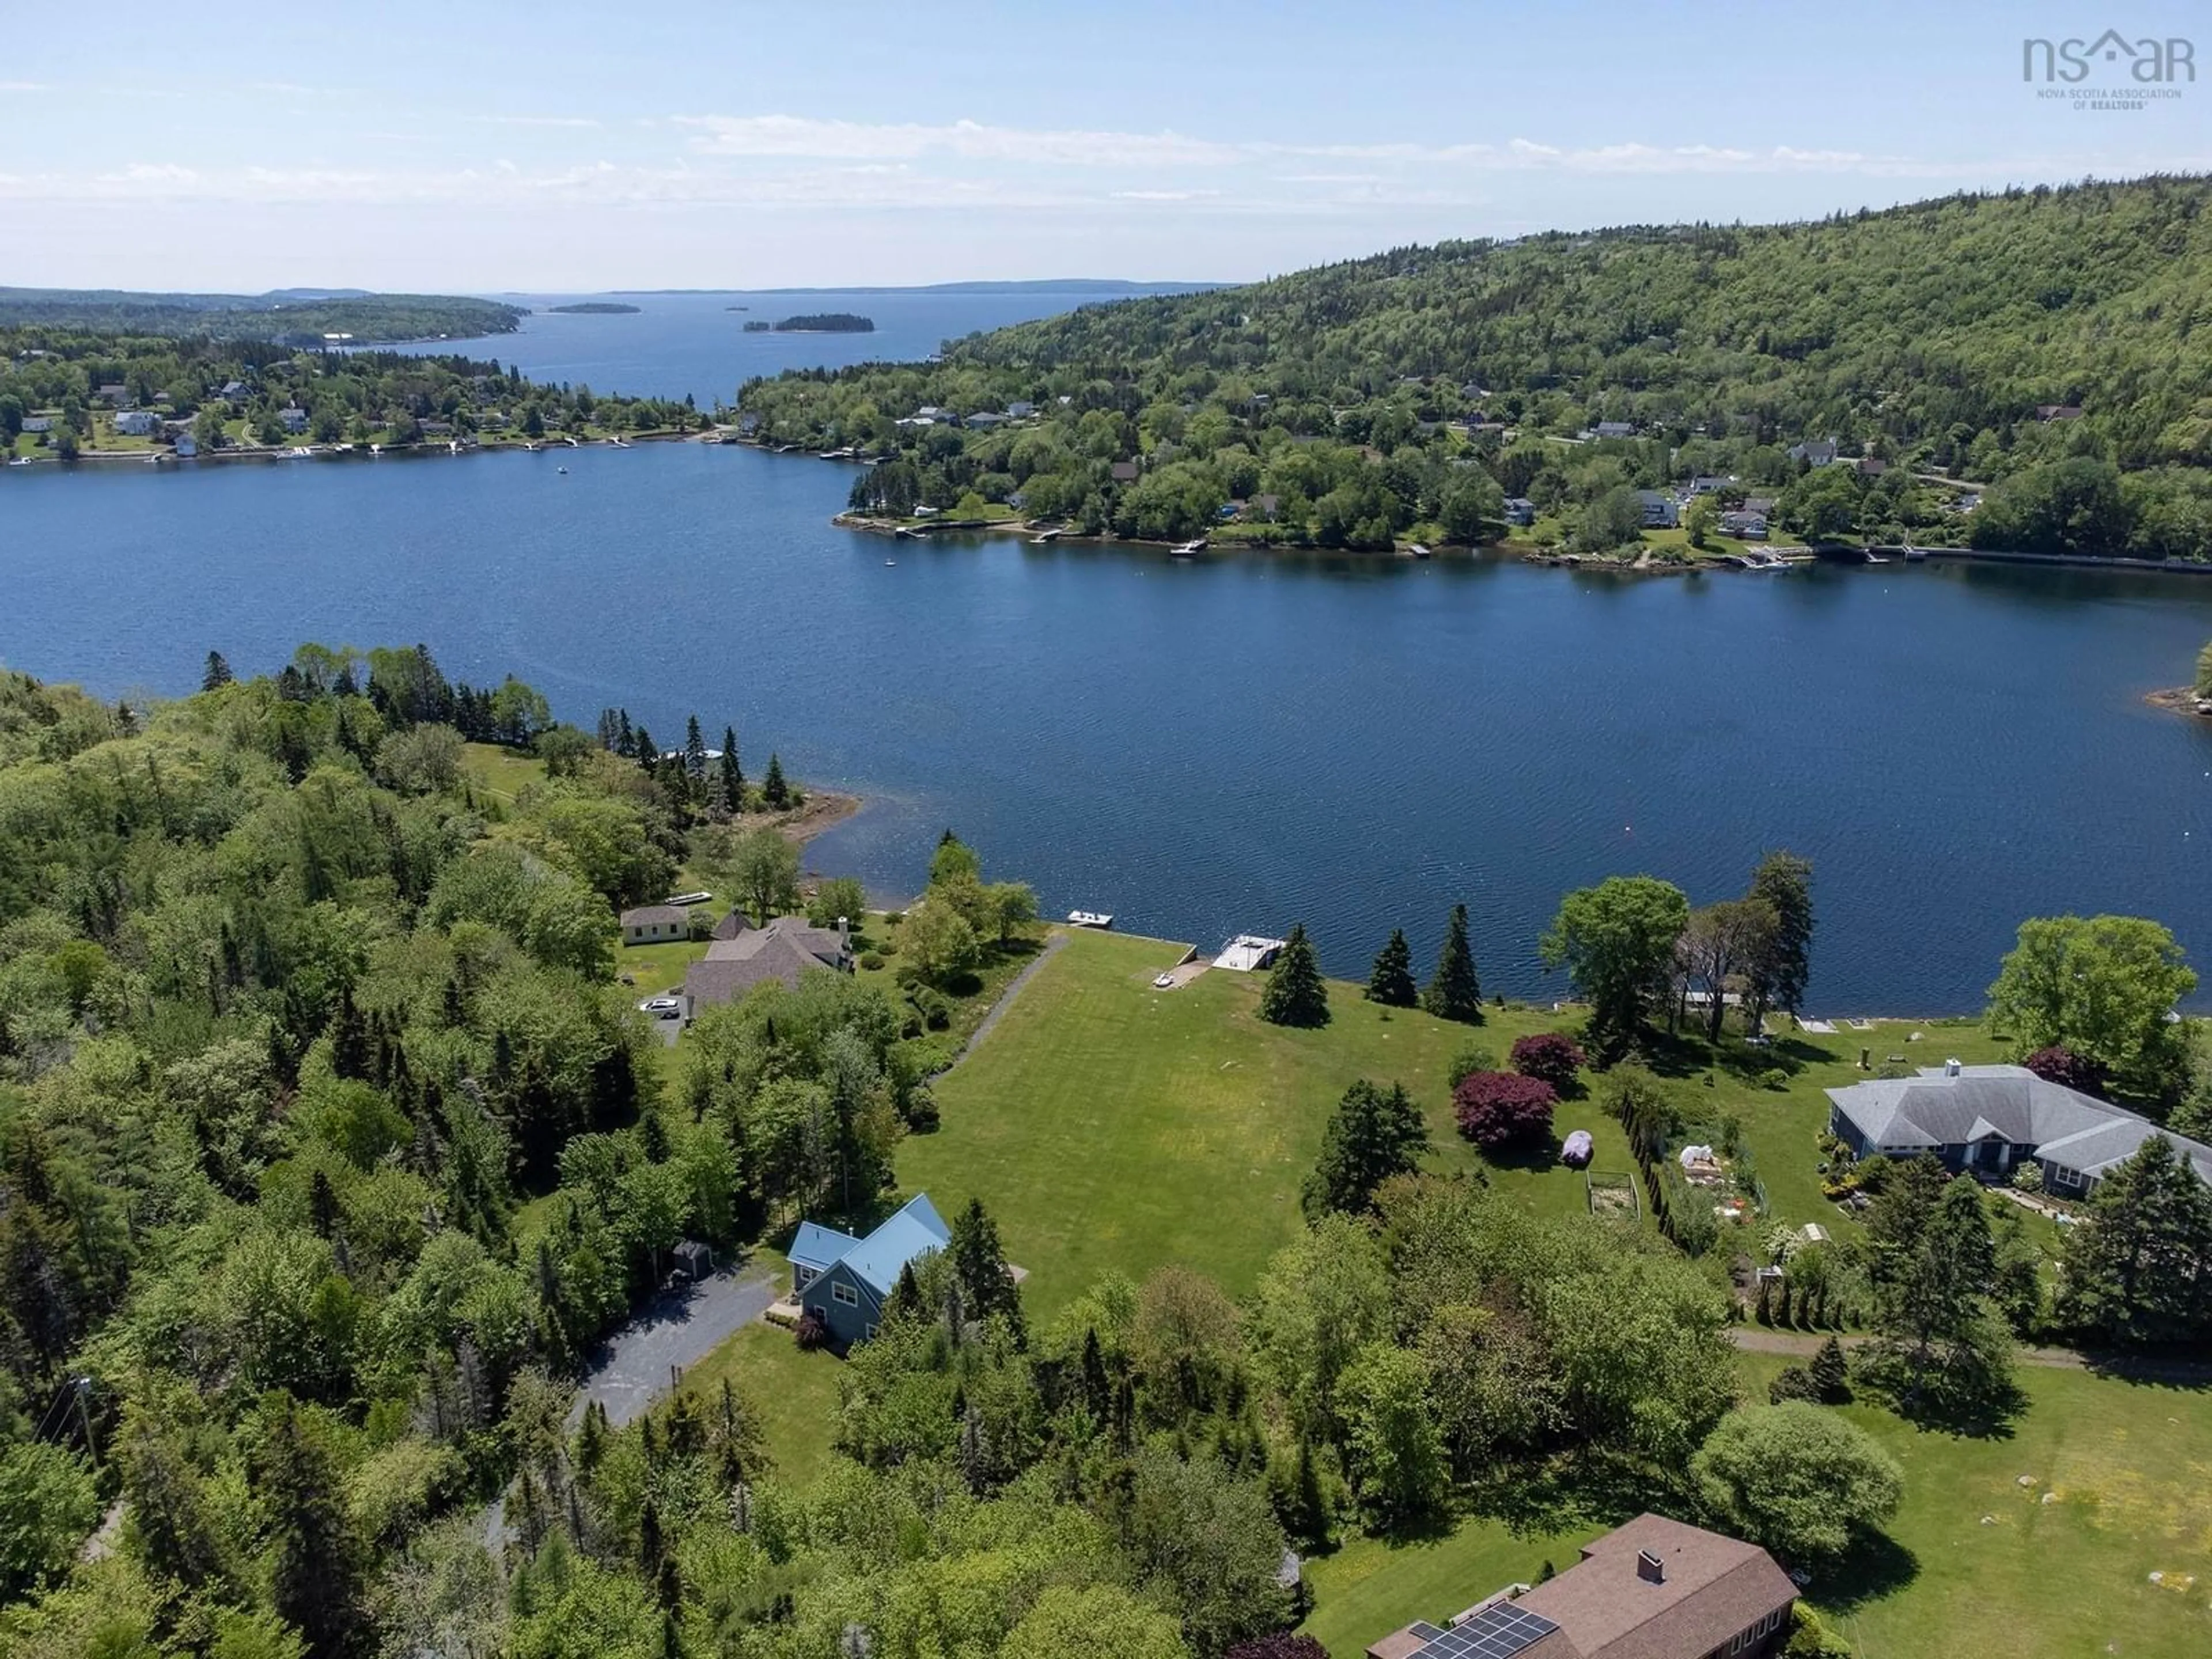 Lakeview for 77 Sunnywood Rd, Head Of St. Margarets Bay Nova Scotia B3Z 2C1